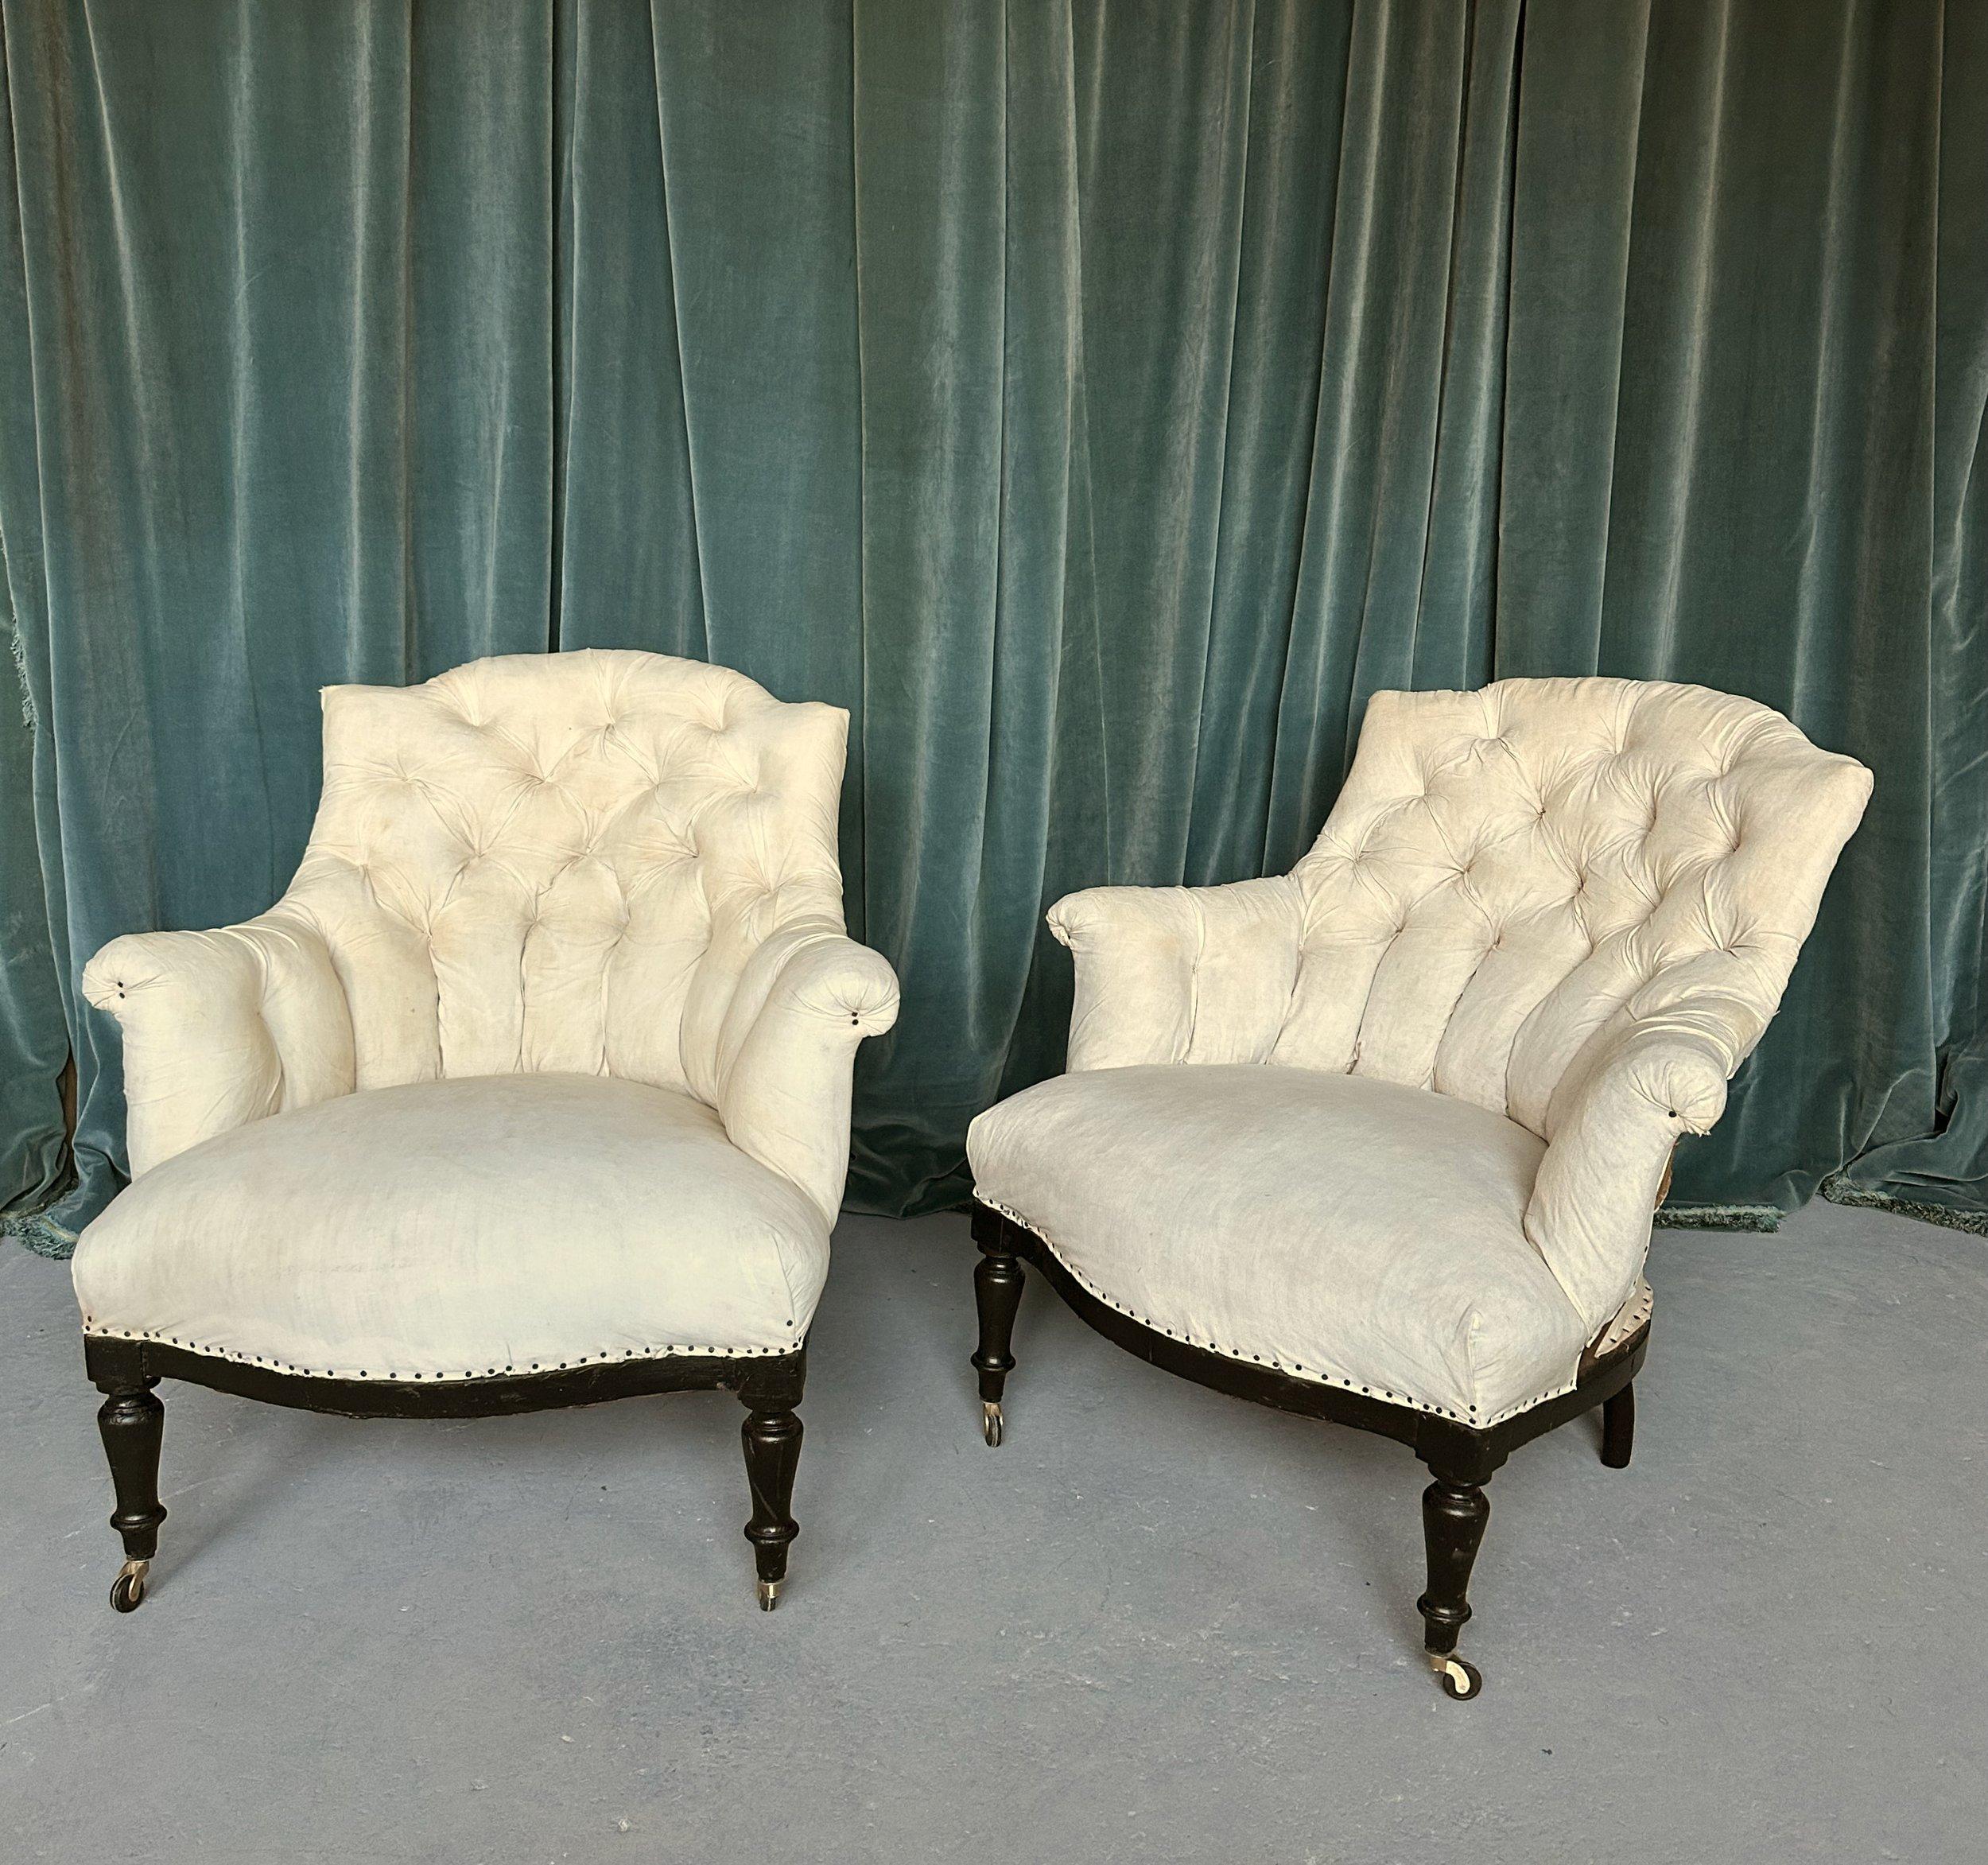 An elegant pair of small scale French 19th century armchairs with diamond tufted backs and scrolled arms. This pair of armchairs from the Napoleon III period features the 